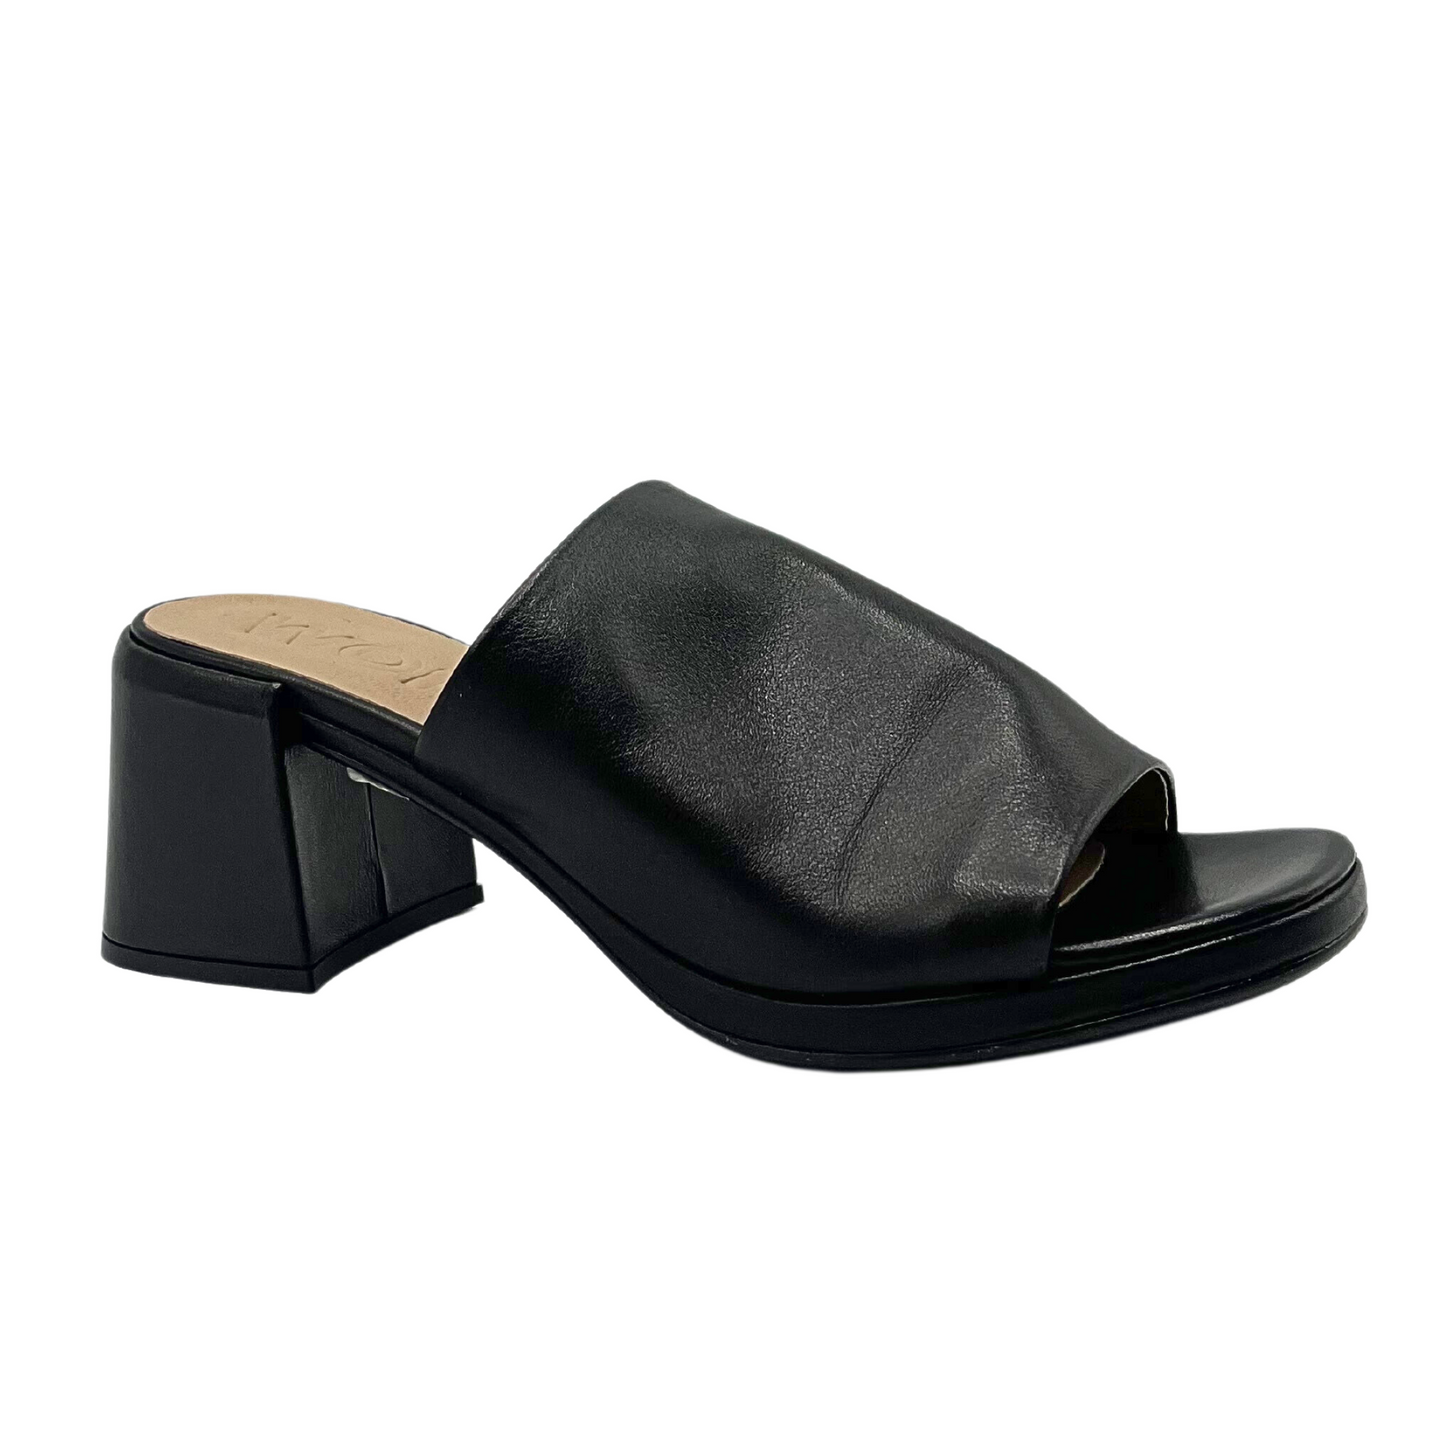 Outside view of black leather mule.